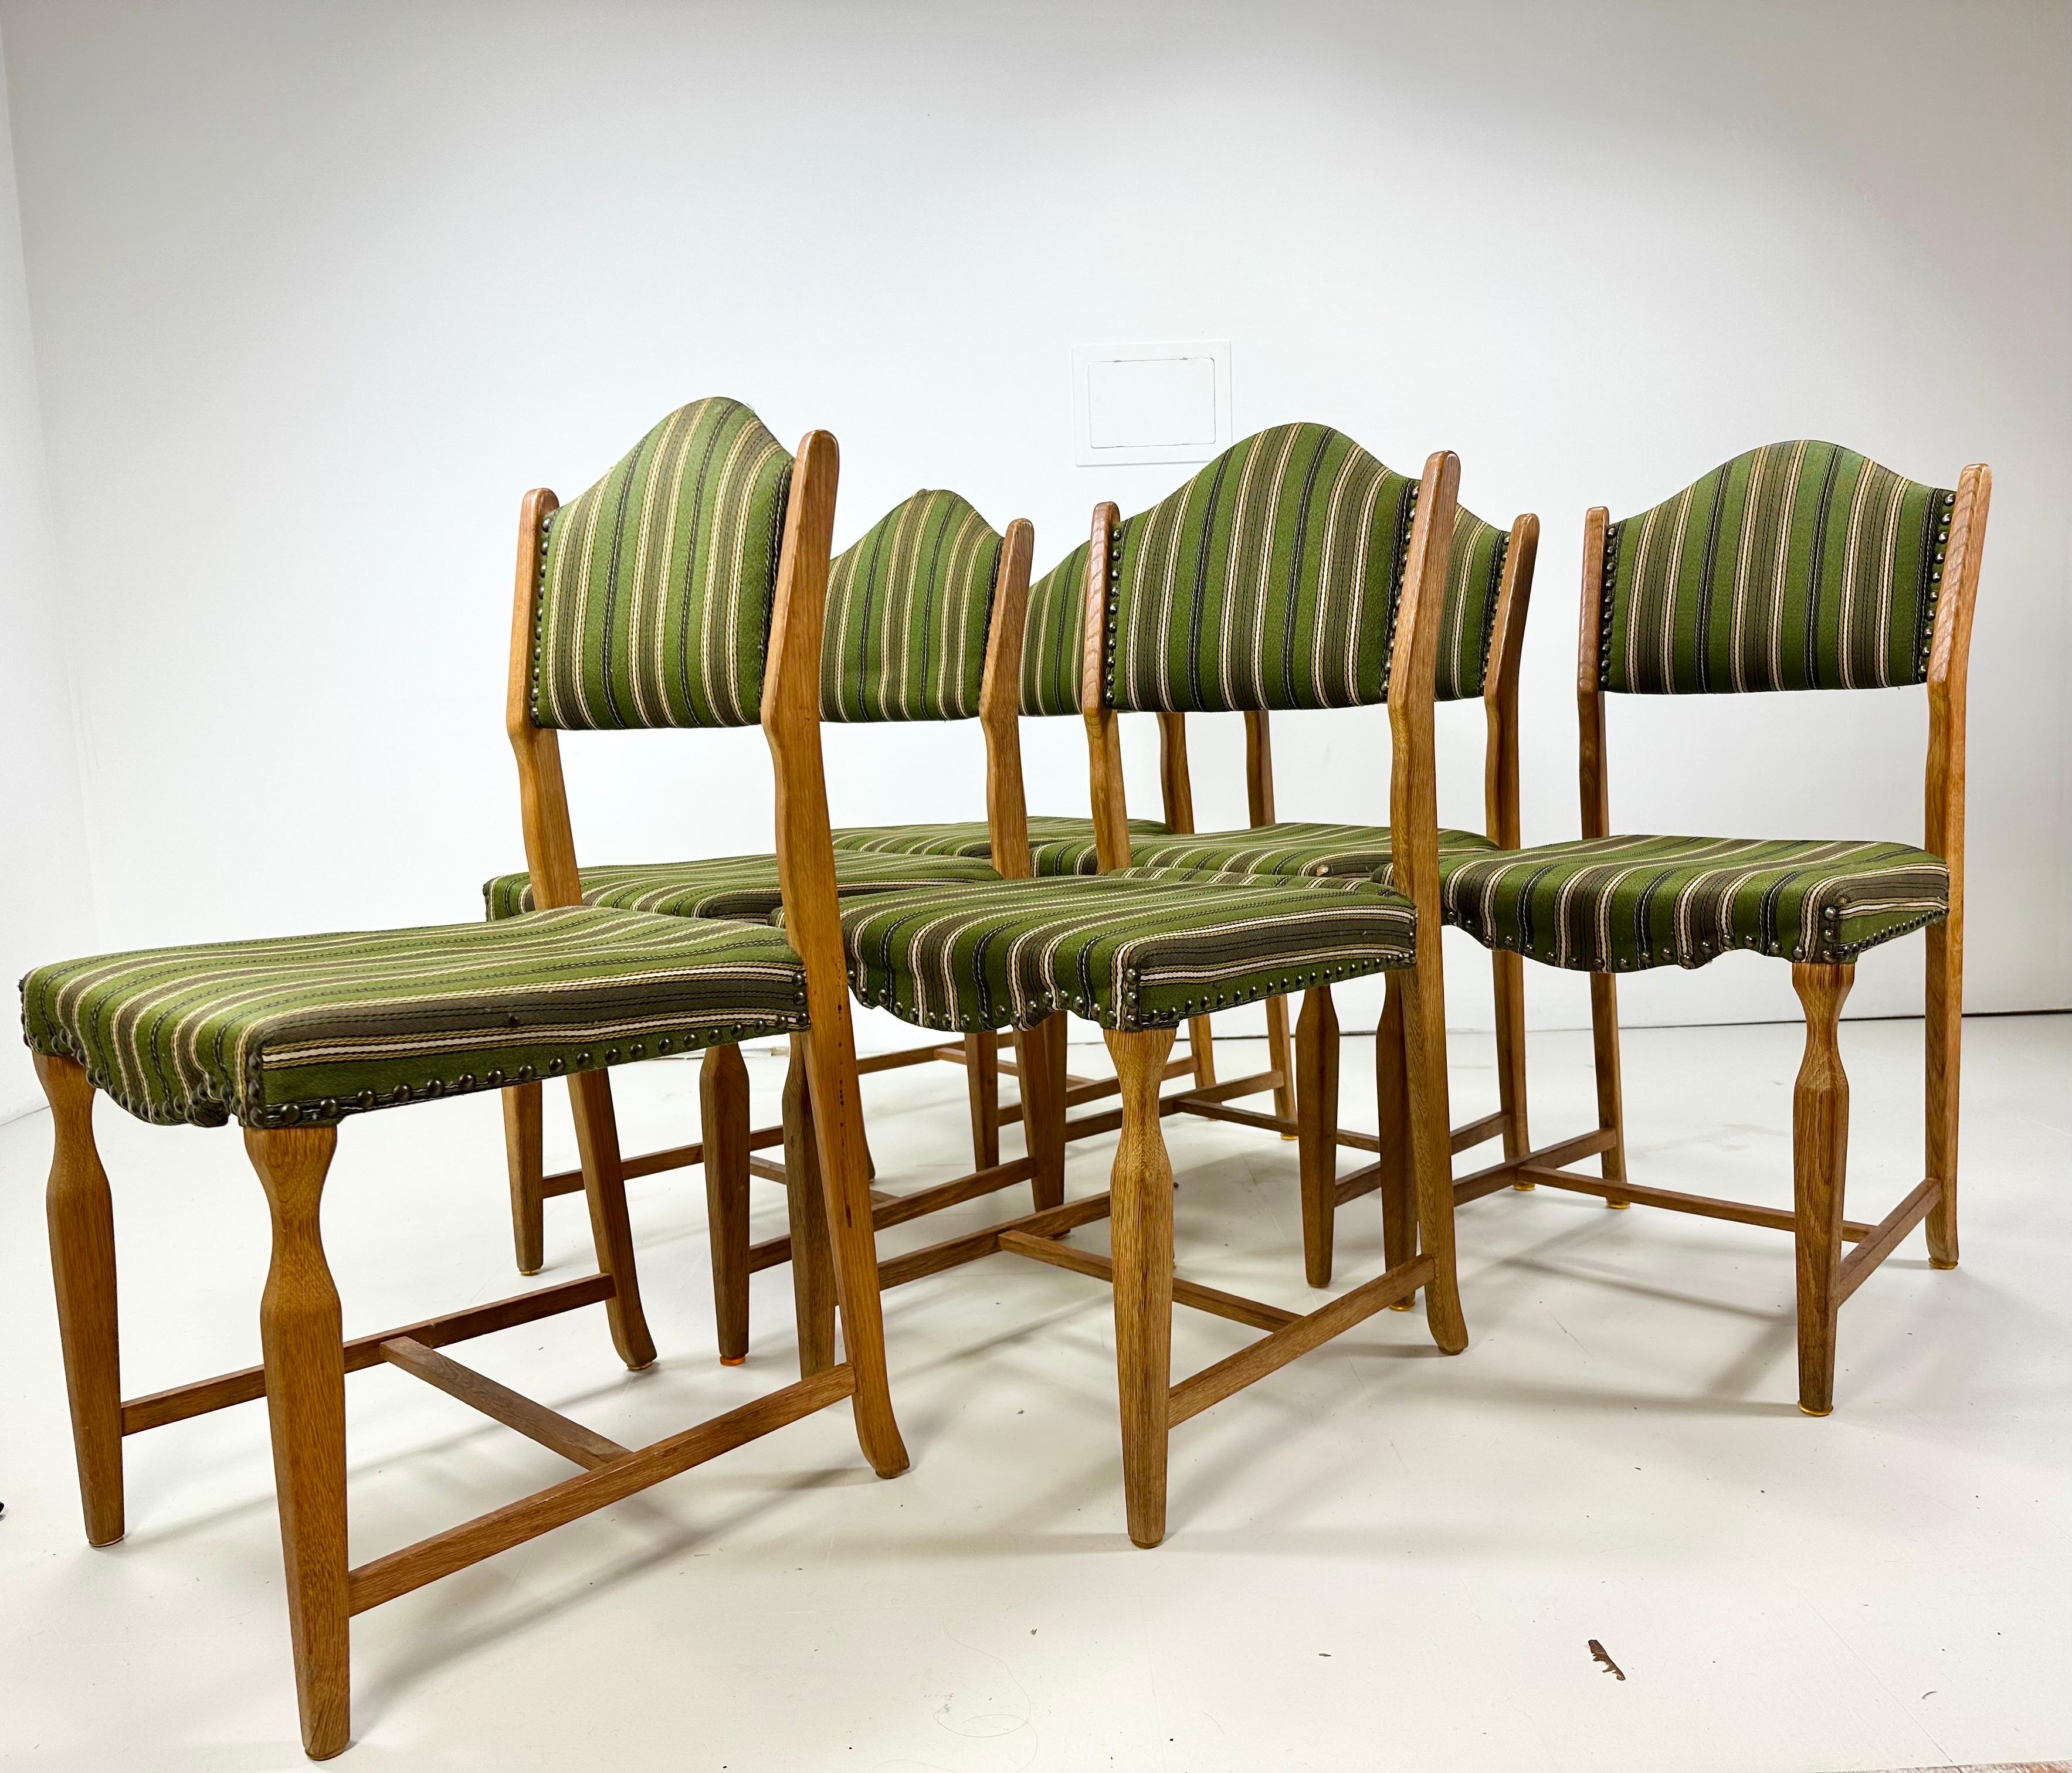 Set of 6 Dining Chairs designed by Henning Kjaernulf. Manufactured by EG Kvalitesmobel, Denmark, 1960’s. Chairs have a rustic warm finish and lines along with some classic mid century elements. Original upholstery and nailheads.

Delivery To NYC